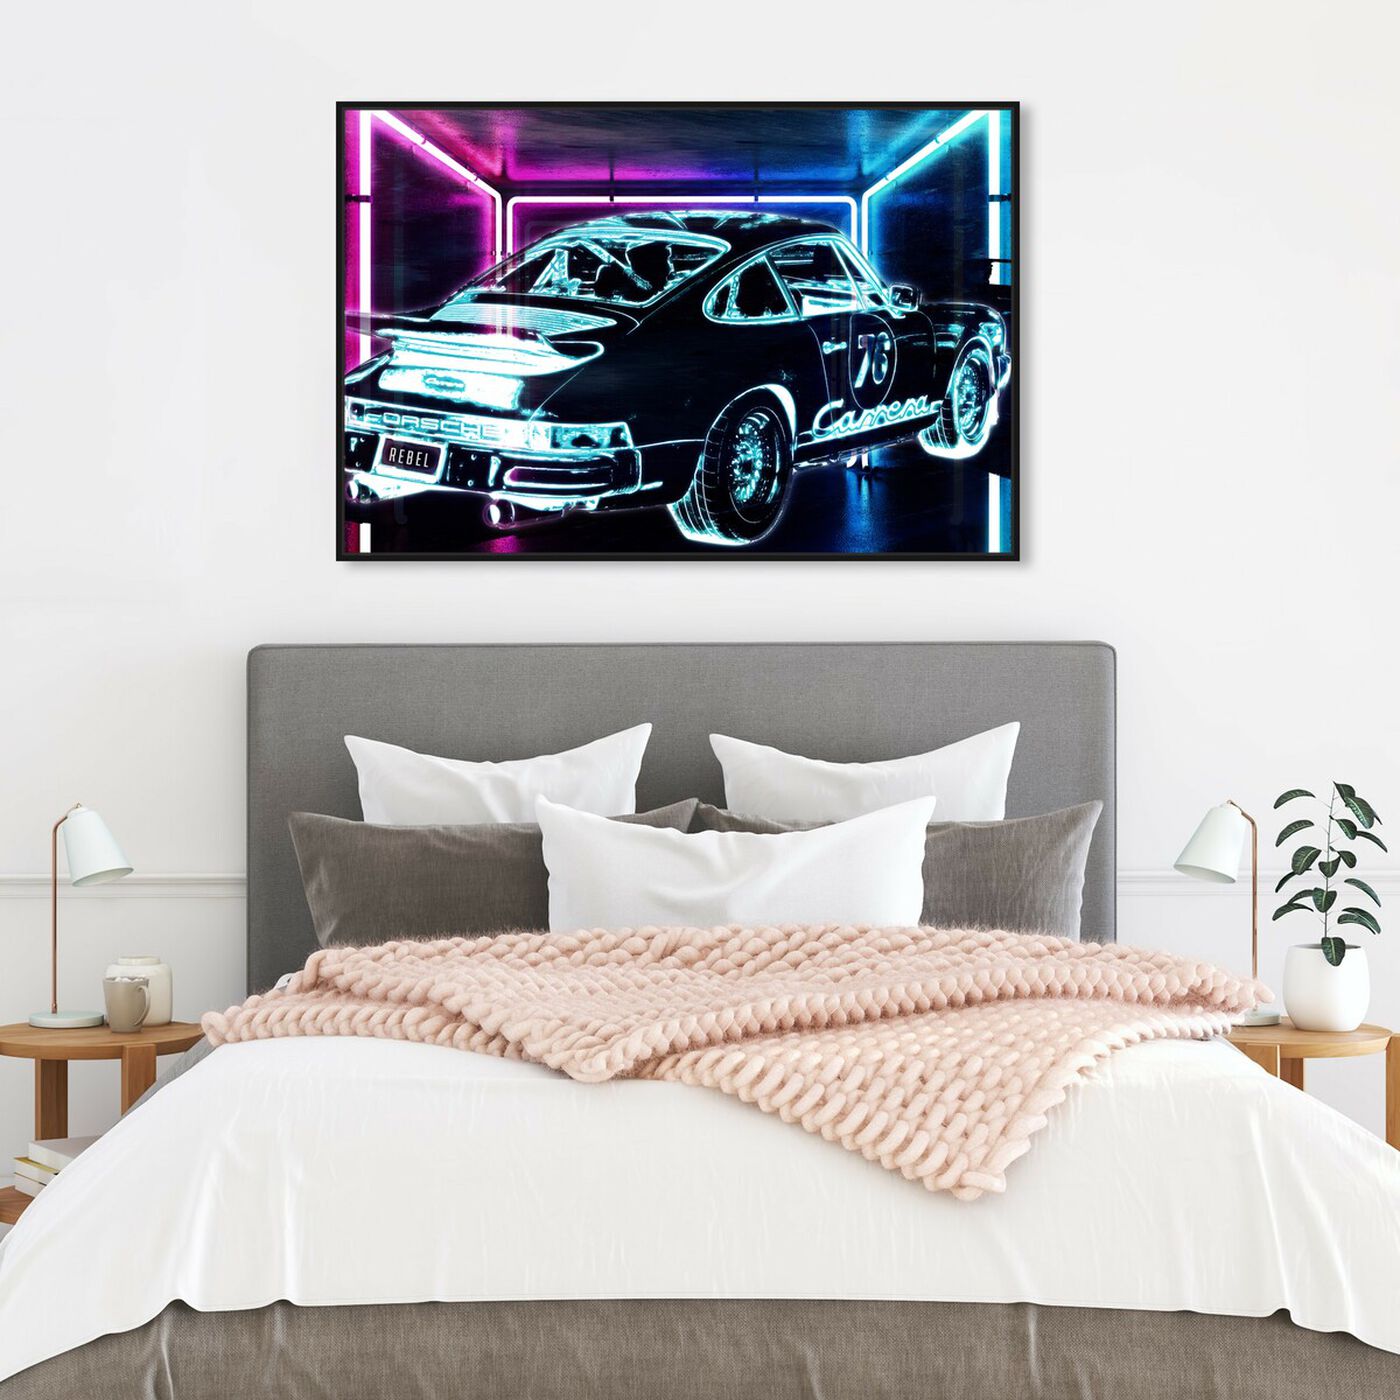 Hanging view of CyberCar featuring transportation and automobiles art.